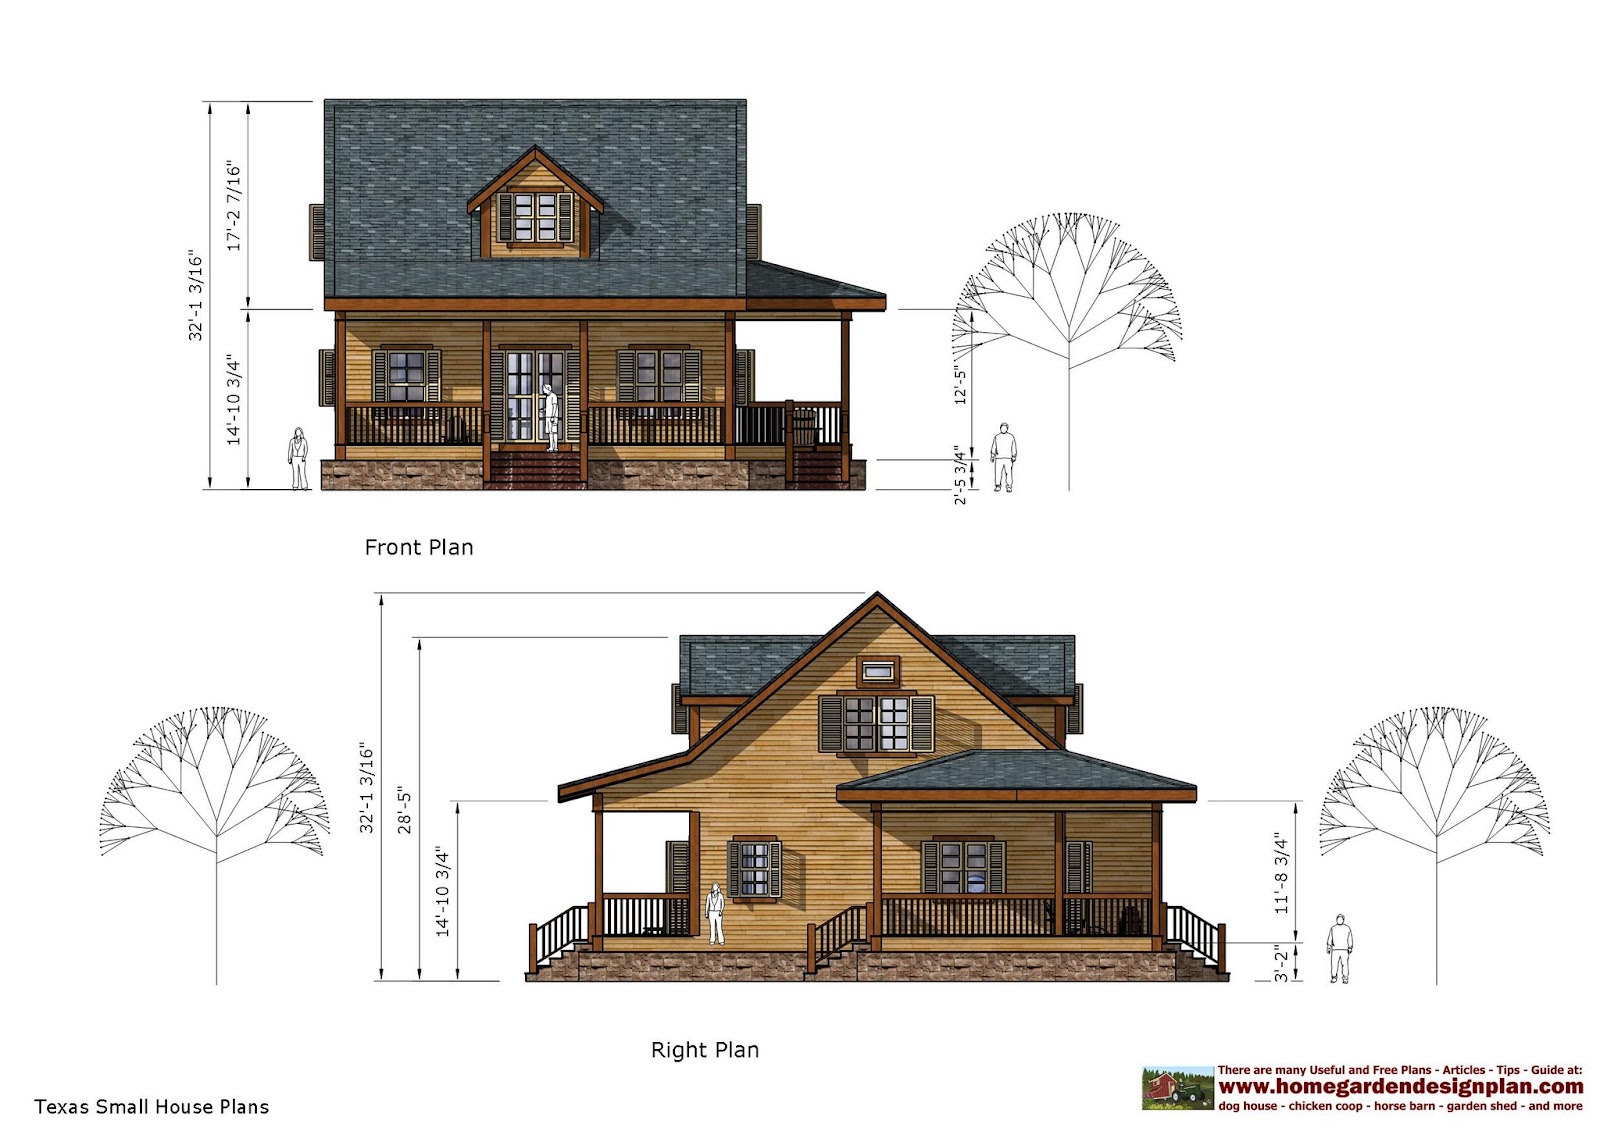  home  garden plans  SH100 Small  House  Plans  Small  House  